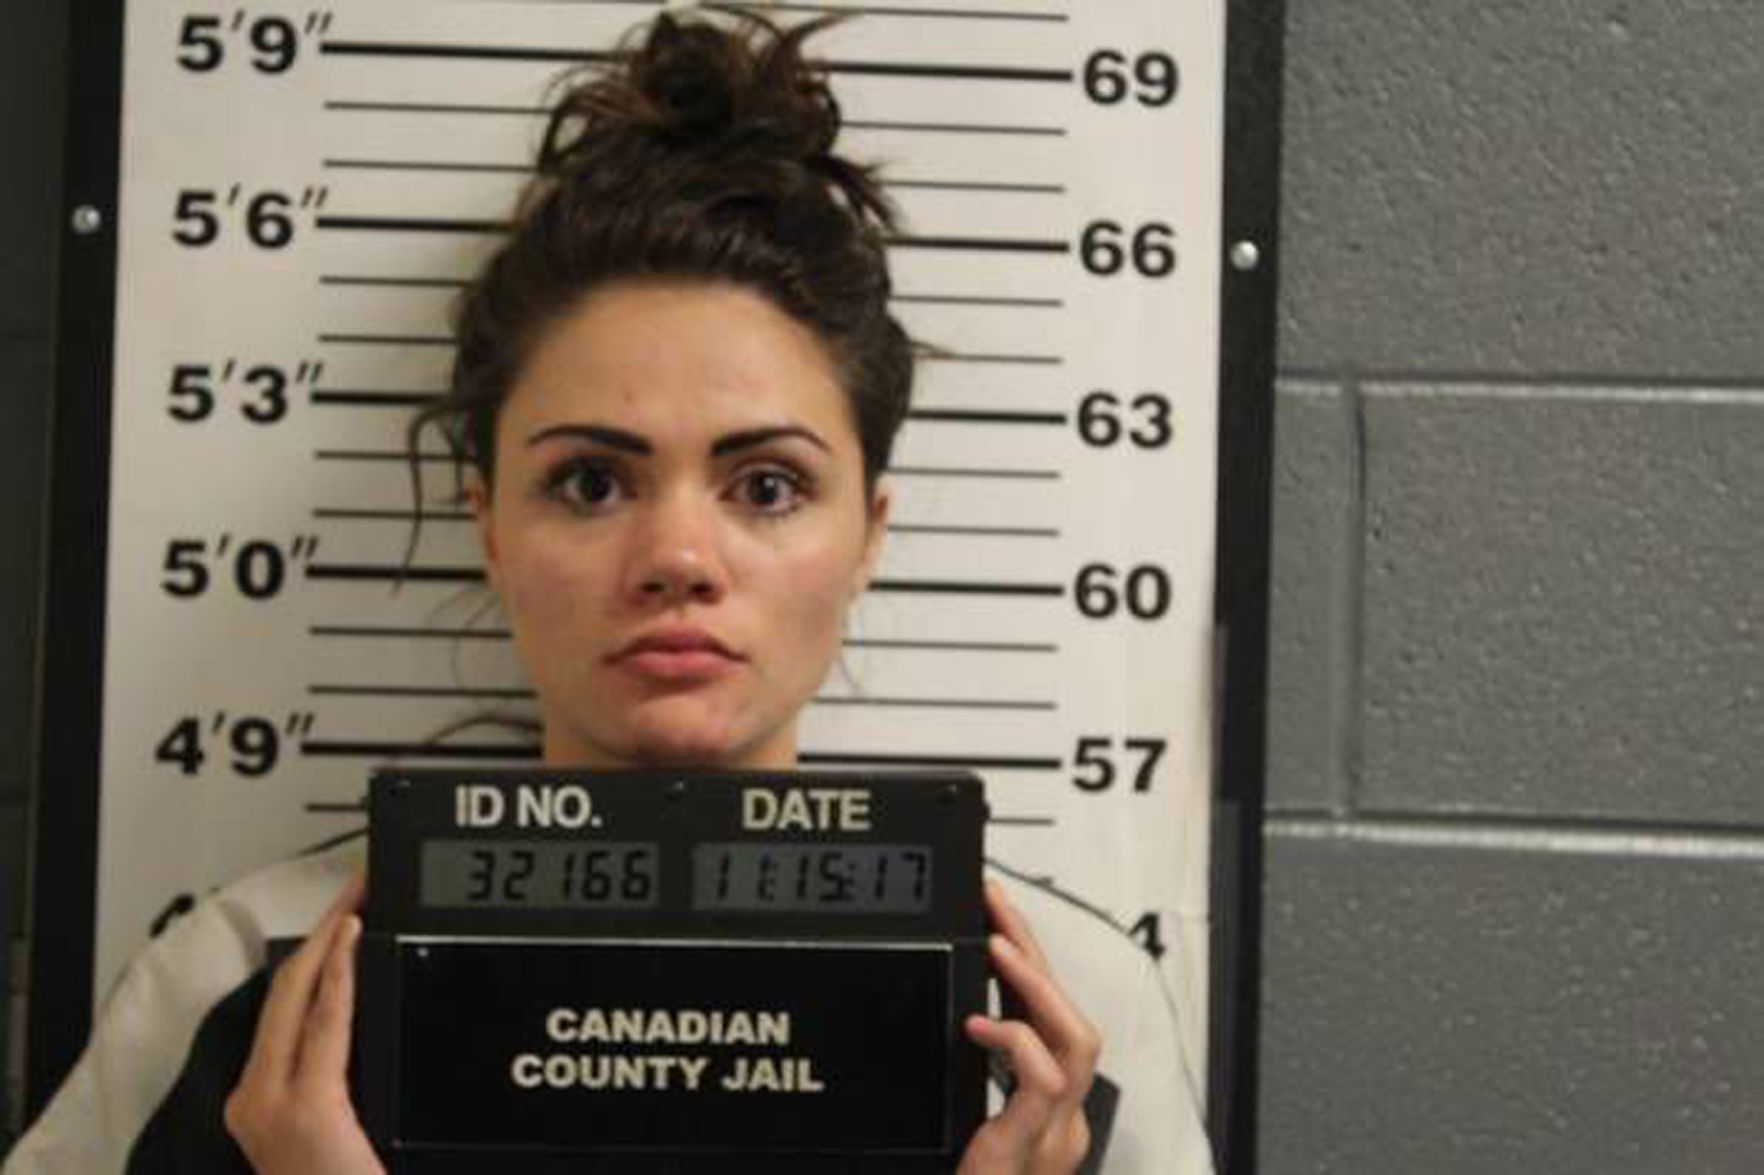 Oklahoma teacher waited to have sex with student in candle-lit room, authorities picture